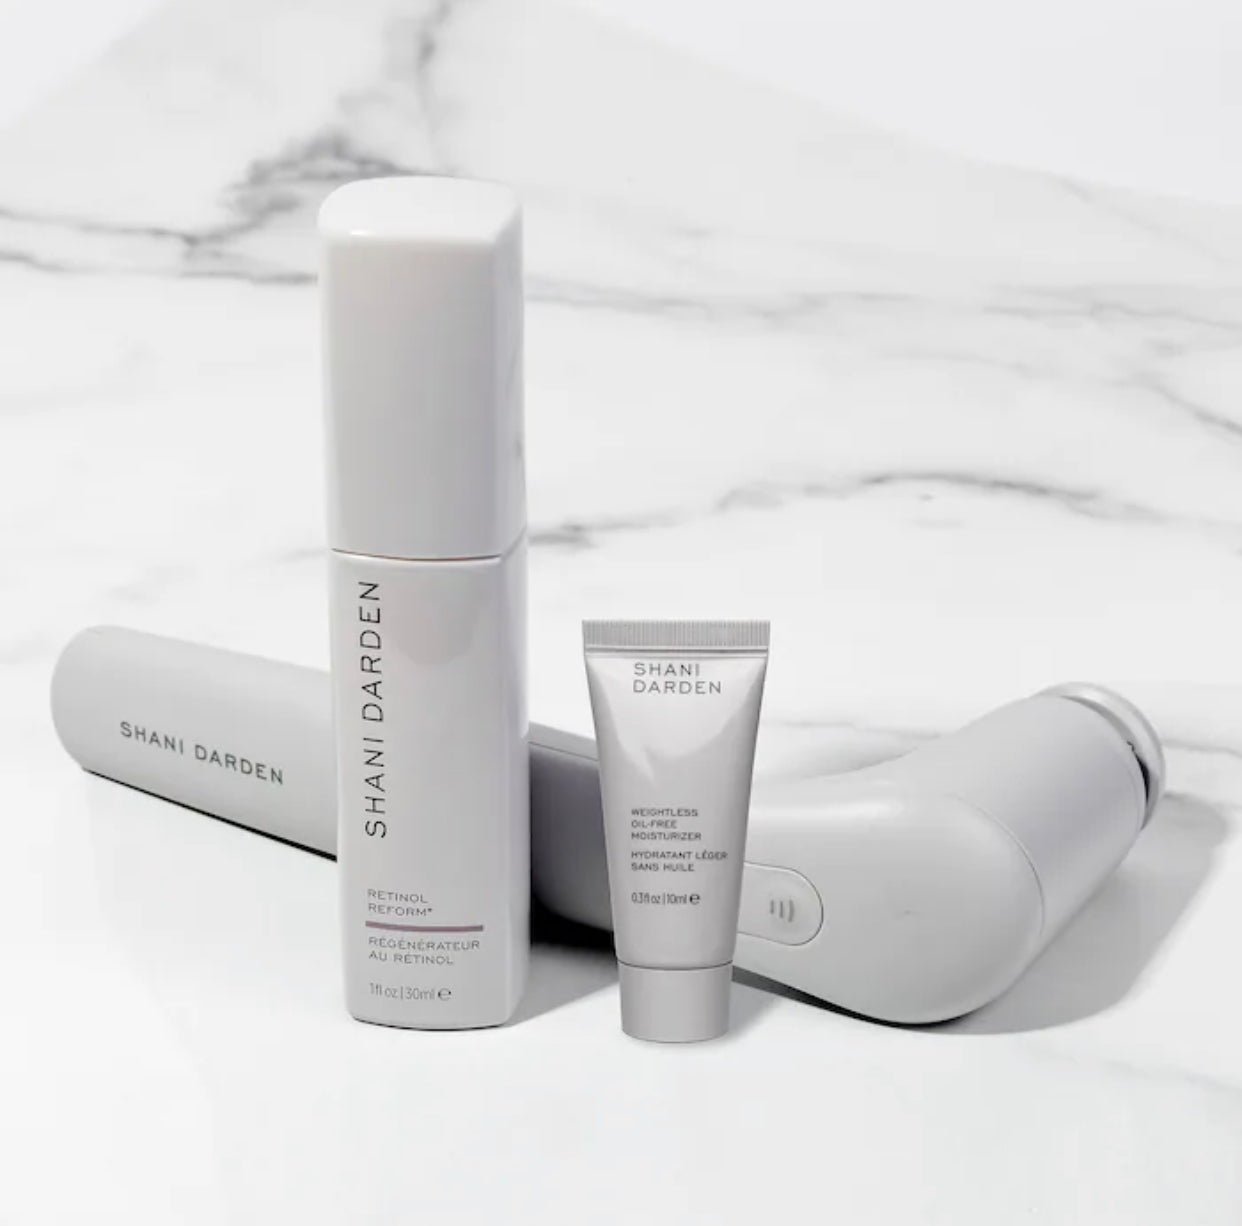 SHANI DARDEN SKIN CARE, SCULPT AND FIRM SET